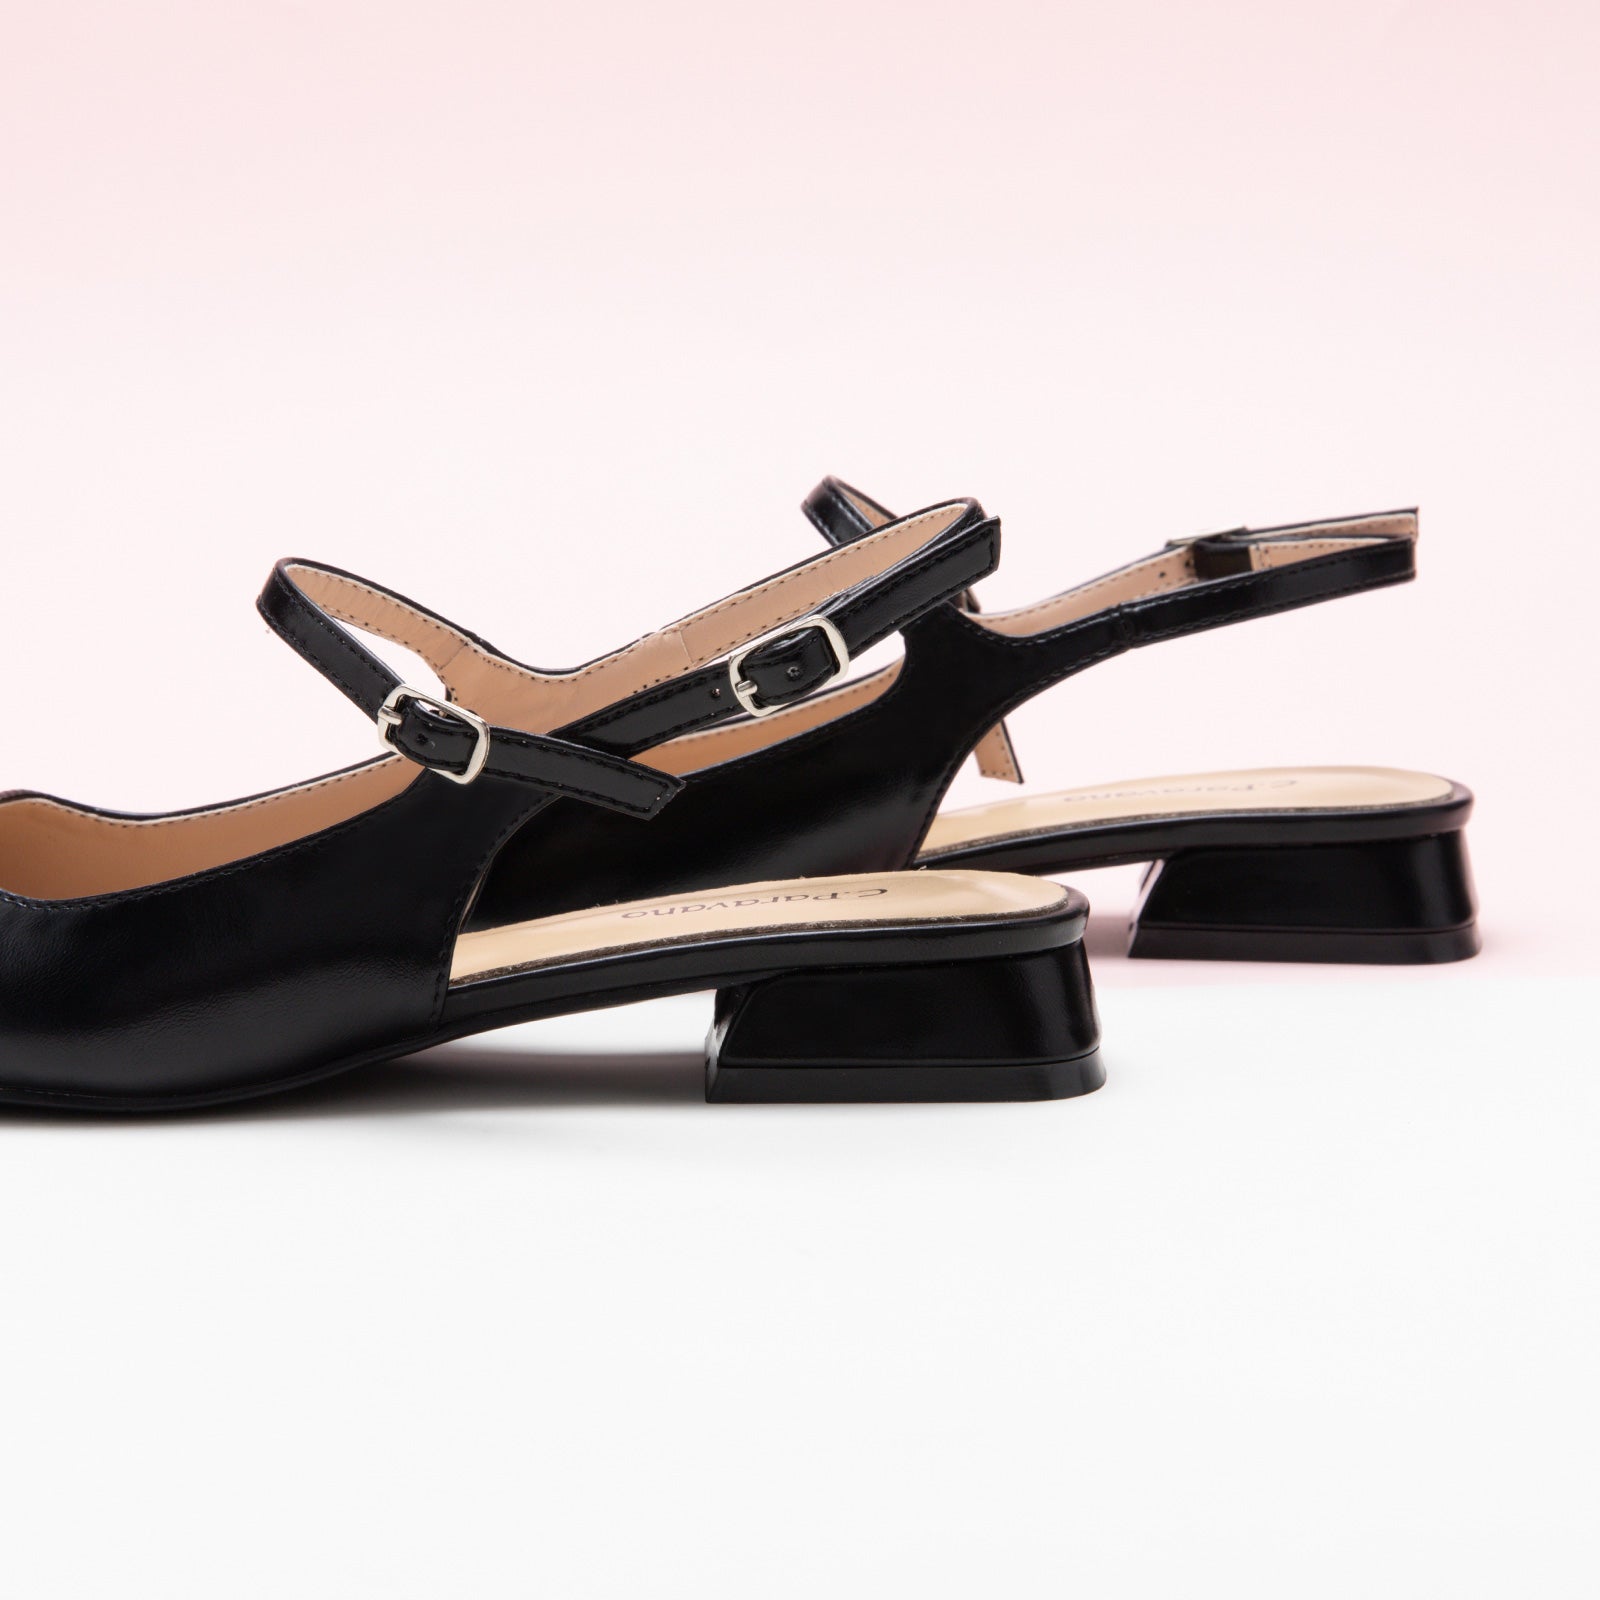 Black Squared Toe Slingback Flats, perfect for city living with a touch of contemporary sophistication